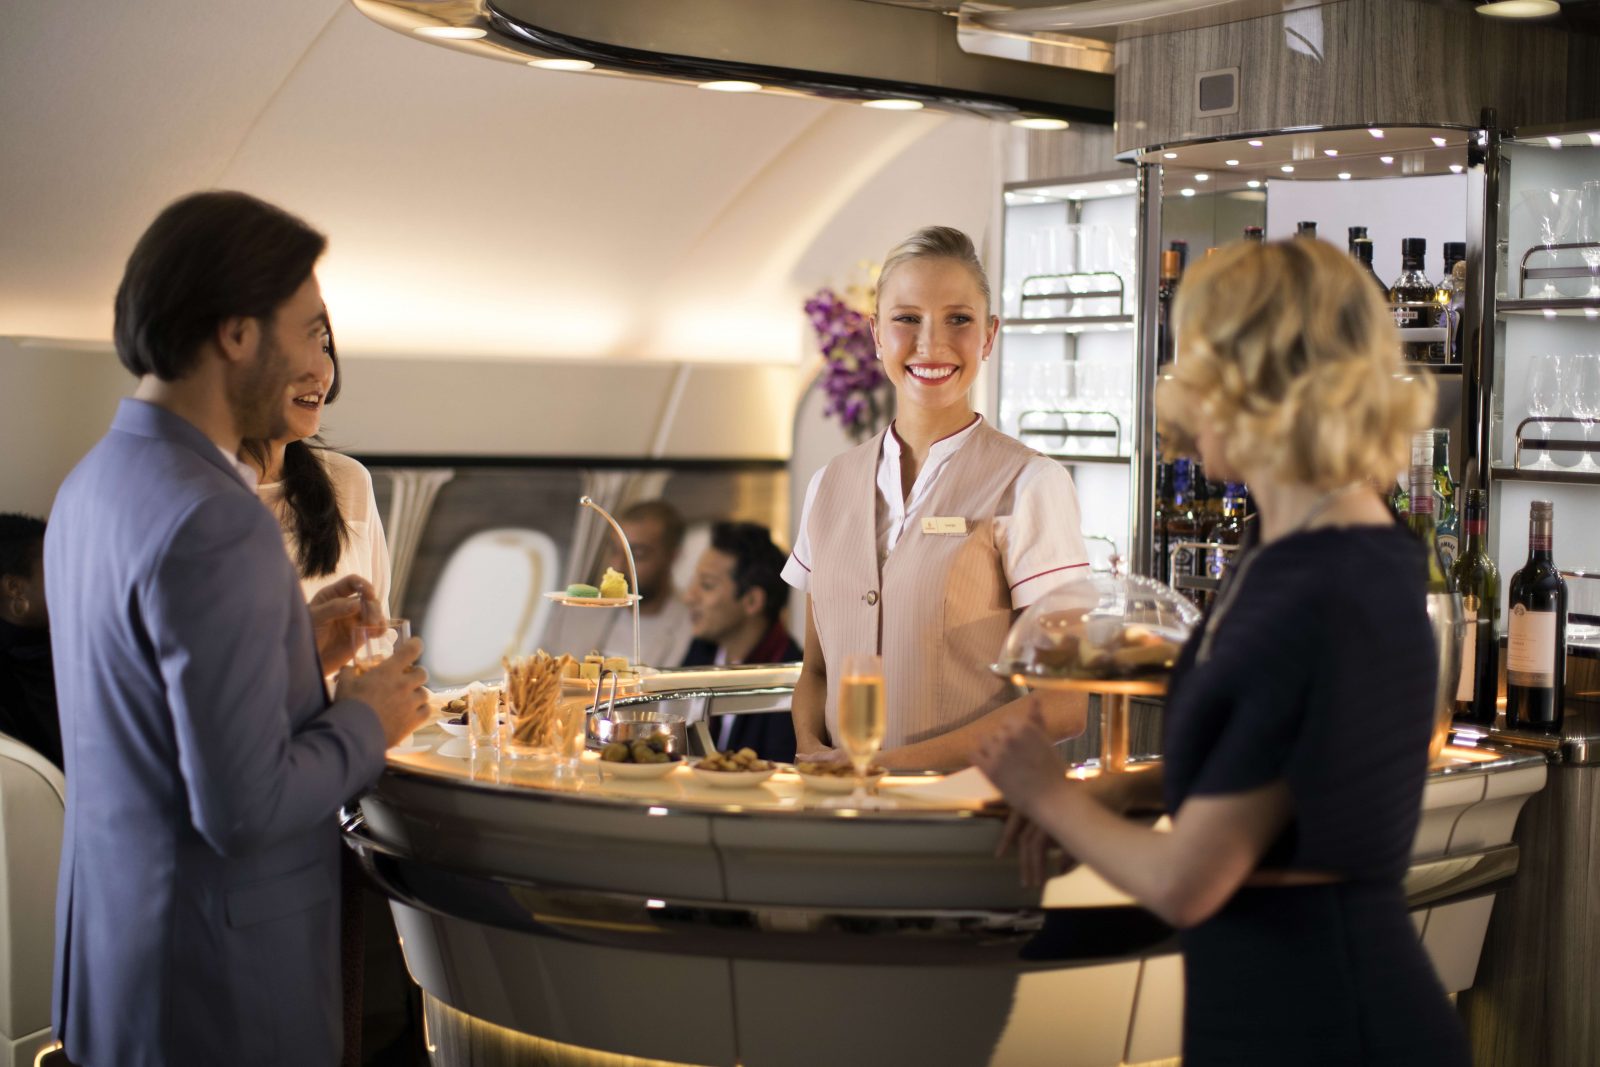 Could it Really be Illegal to Drink Alcohol on an Emirates Plane? New UK Government Advice Suggests Just That